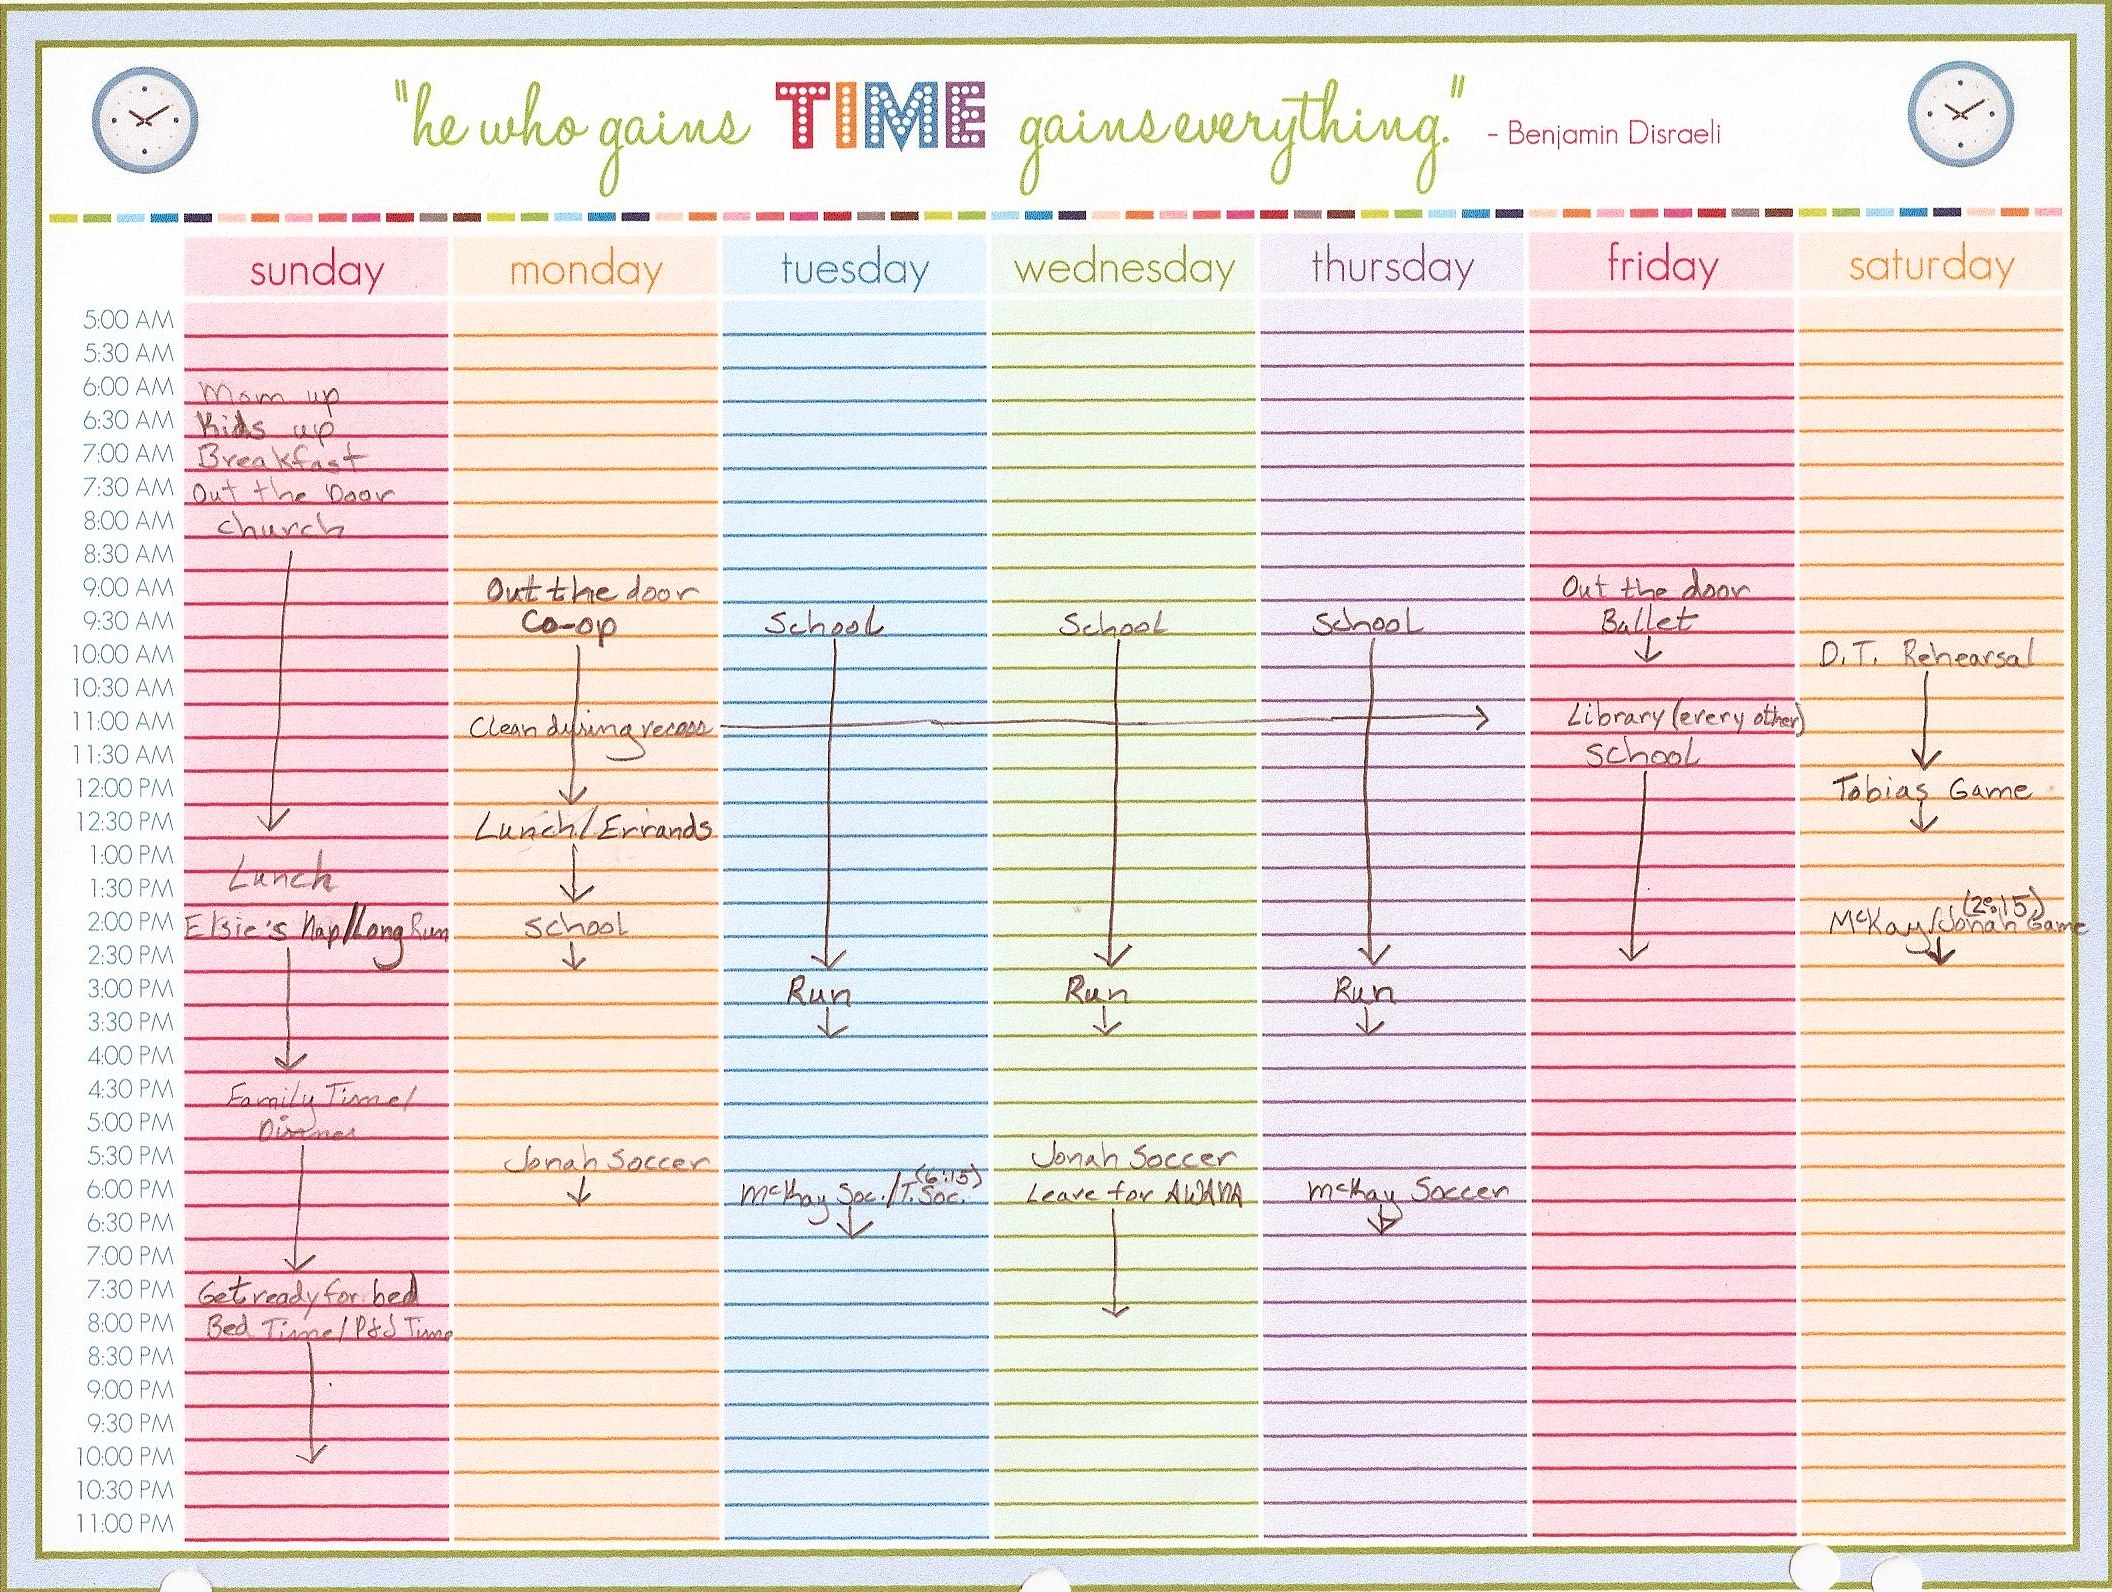 Free Calendar Template With Time Slots | Calendar Template in Calendar With Time Slots Printable